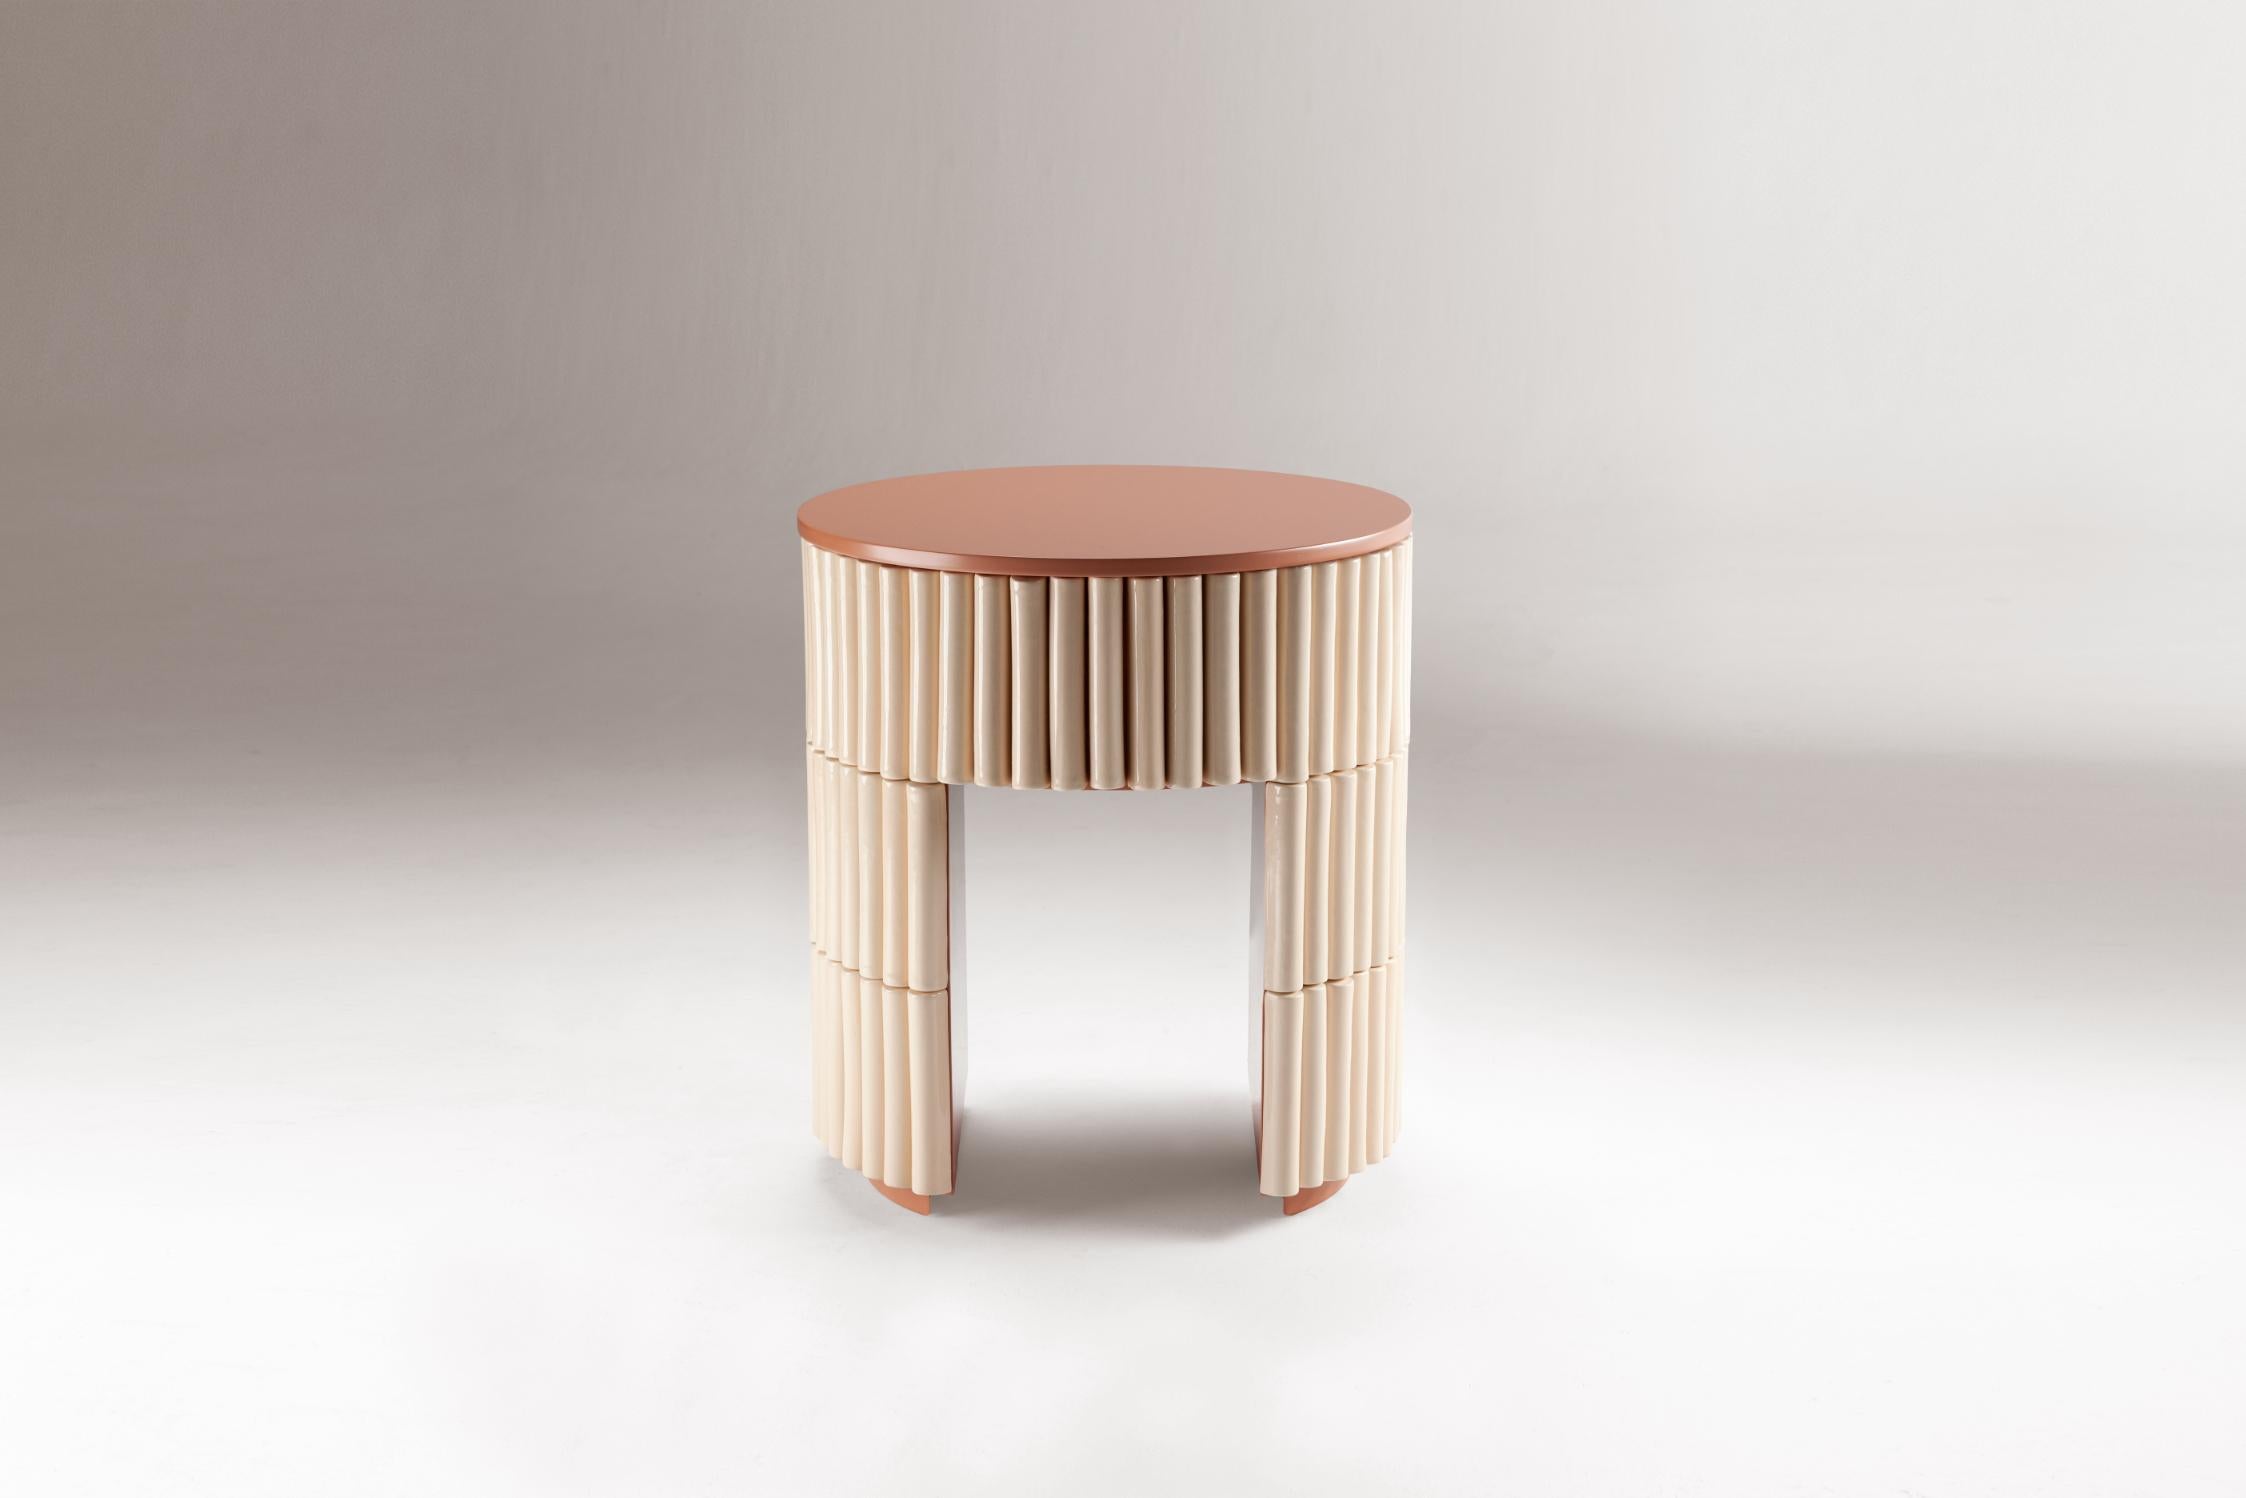 Nouvelle Vague Side Table by Dooq
Dimensions: ø 54 x H 37.5 cm
Materials: Off white mar di giava tiles, powder mate lacquered wood.


Dooq is a design company dedicated to celebrate the luxury of living. Creating designs that stimulate the senses,